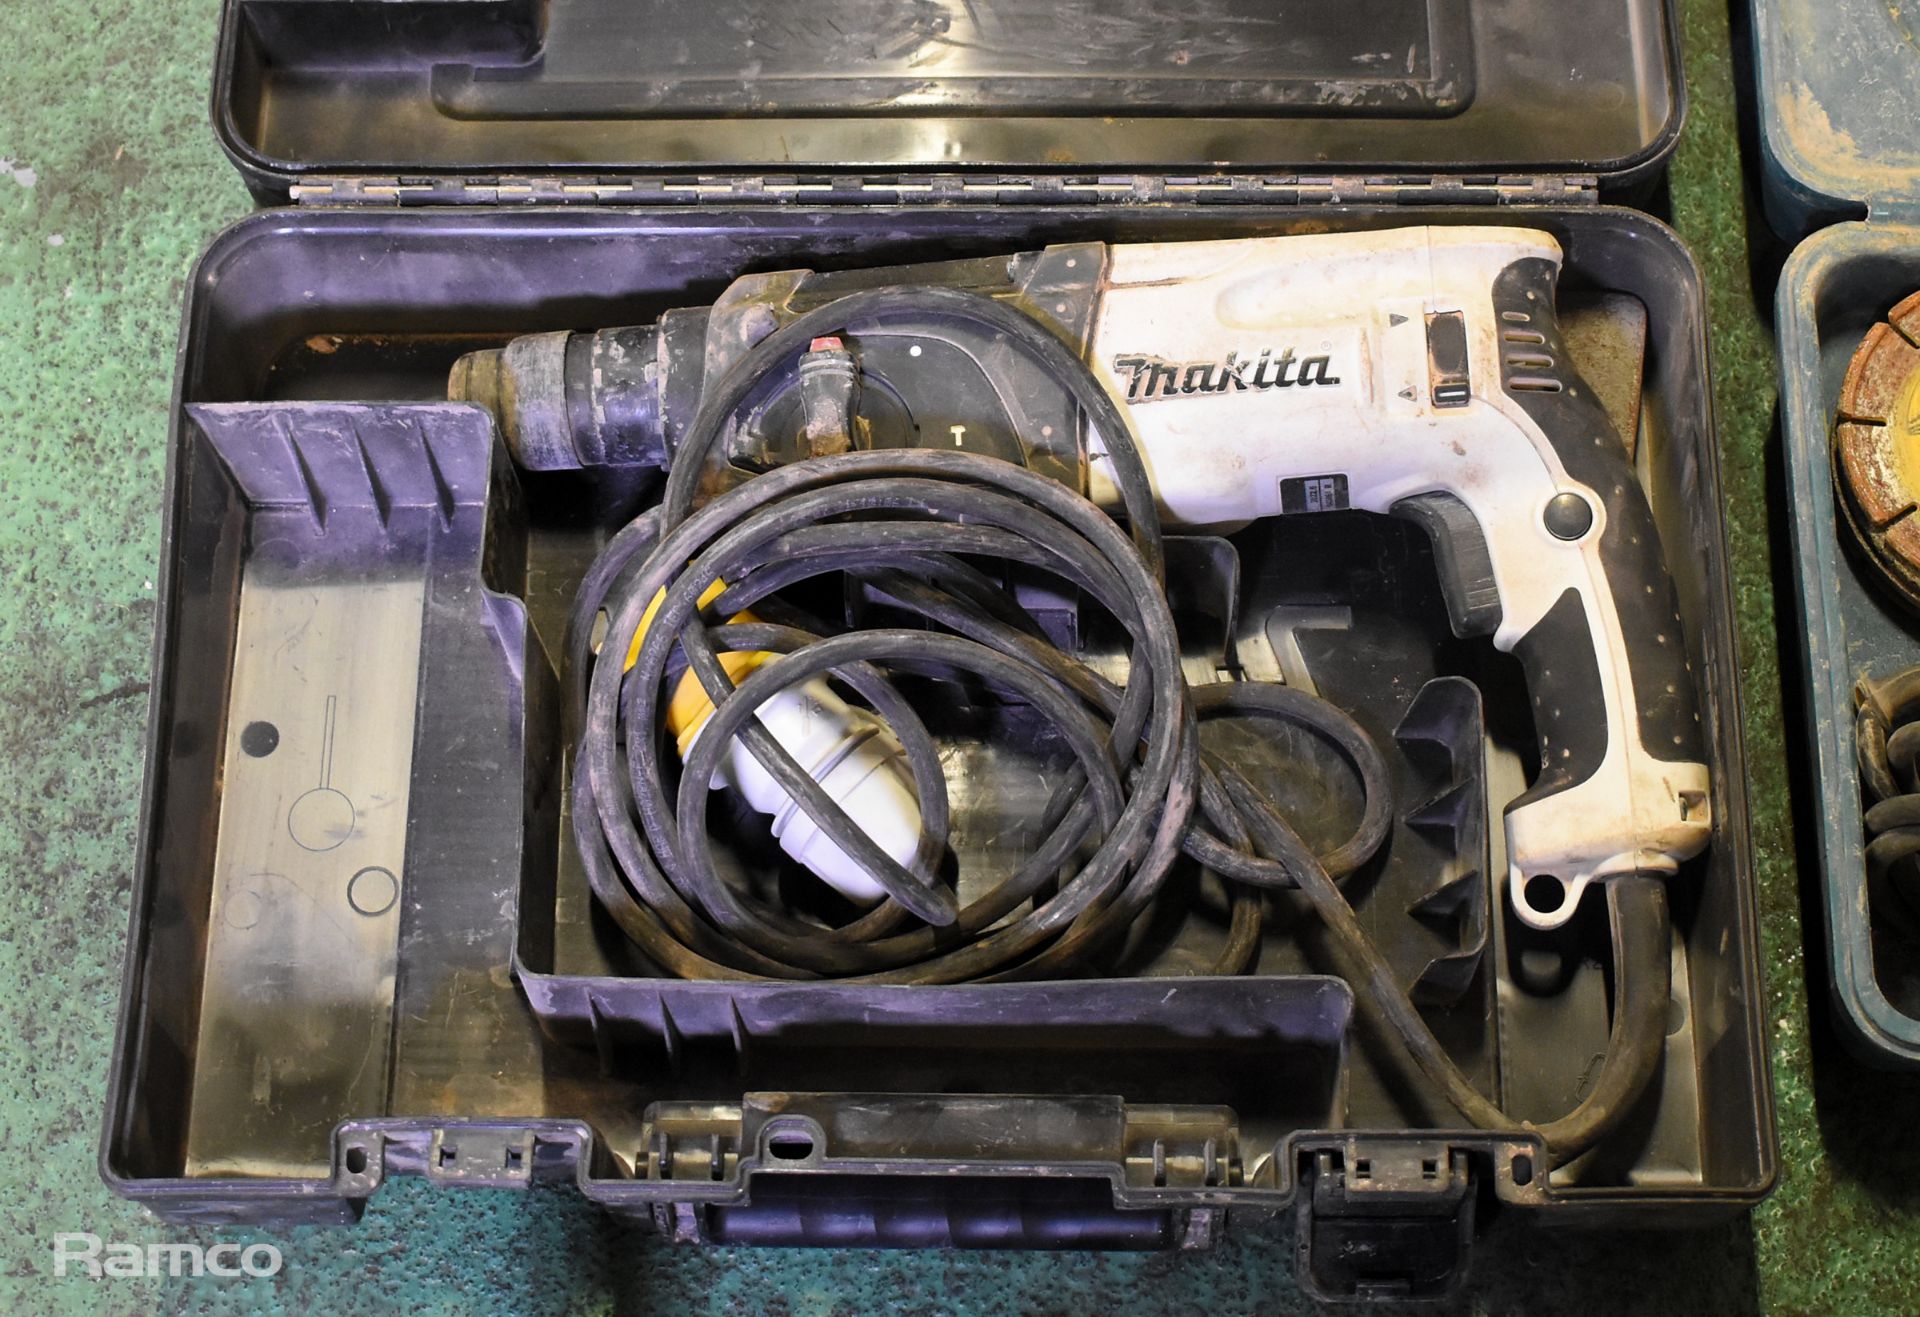 Electrical tools - Rotary hammer drill, Einhell planer, 2x angle grinders, angle grinder with case - Image 2 of 24